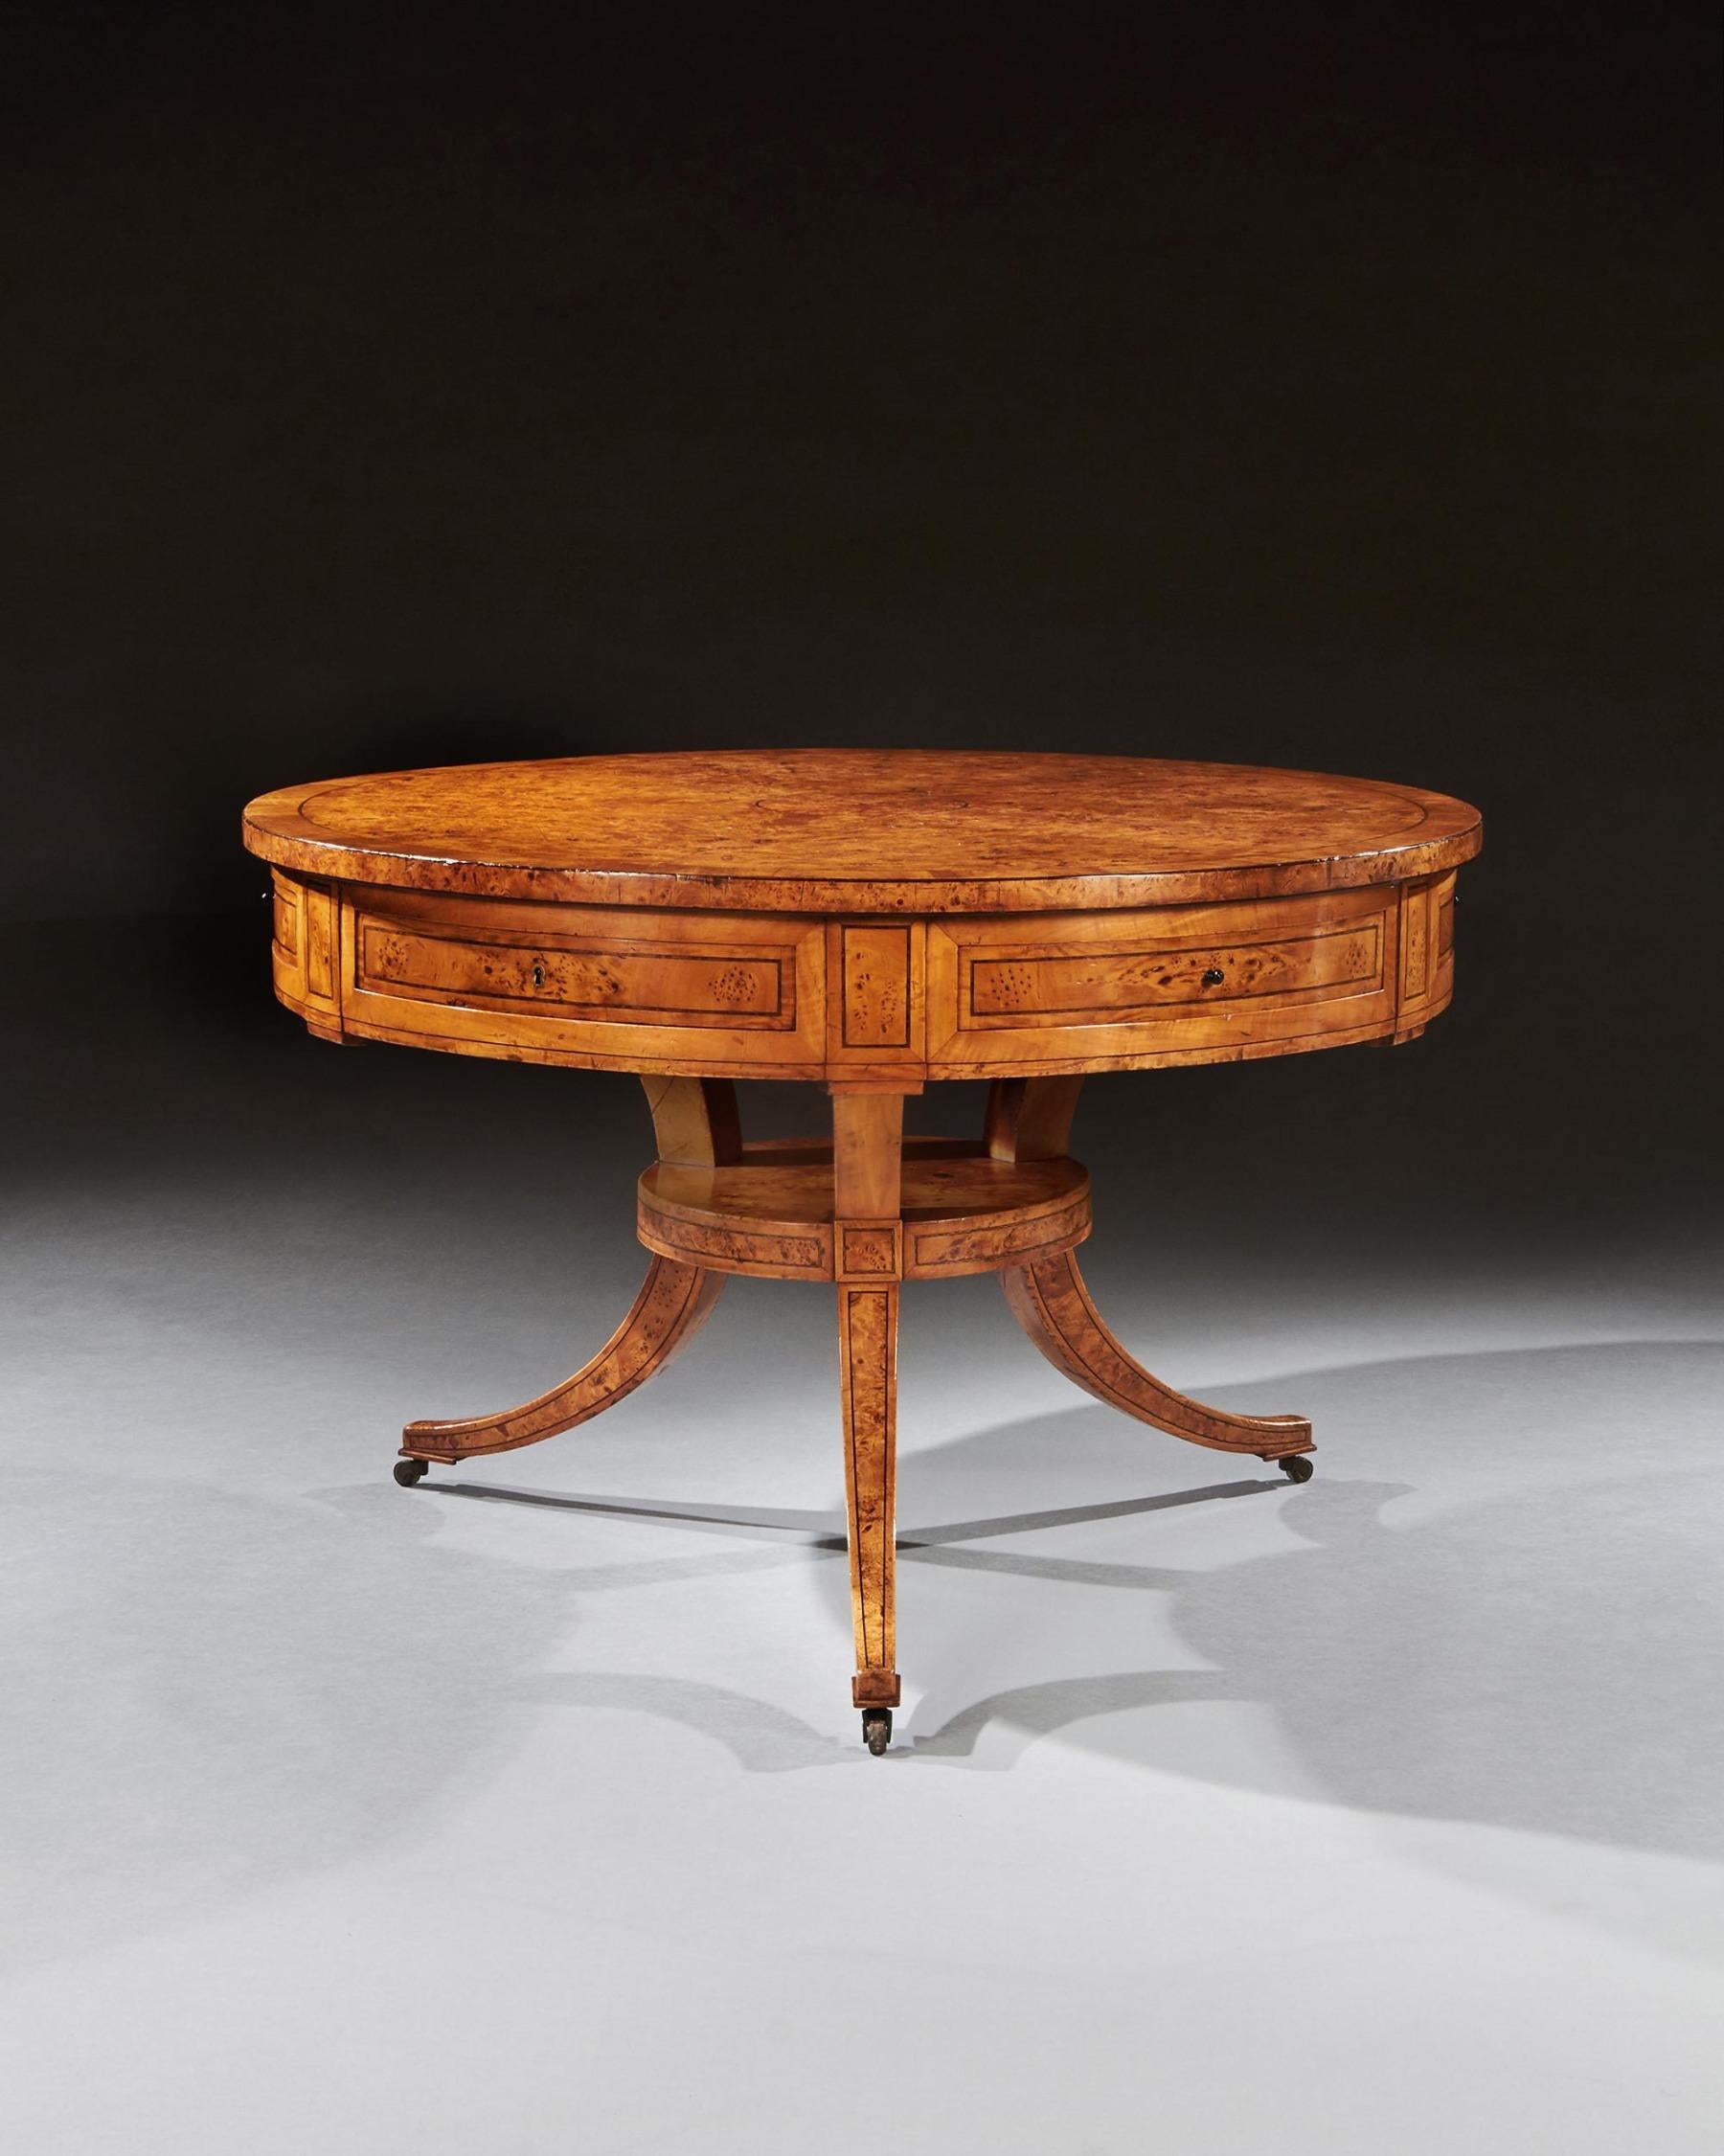 Rare Early 19th Century Scandinavian Burr Root Maple Drum Table In Good Condition For Sale In Benington, Herts